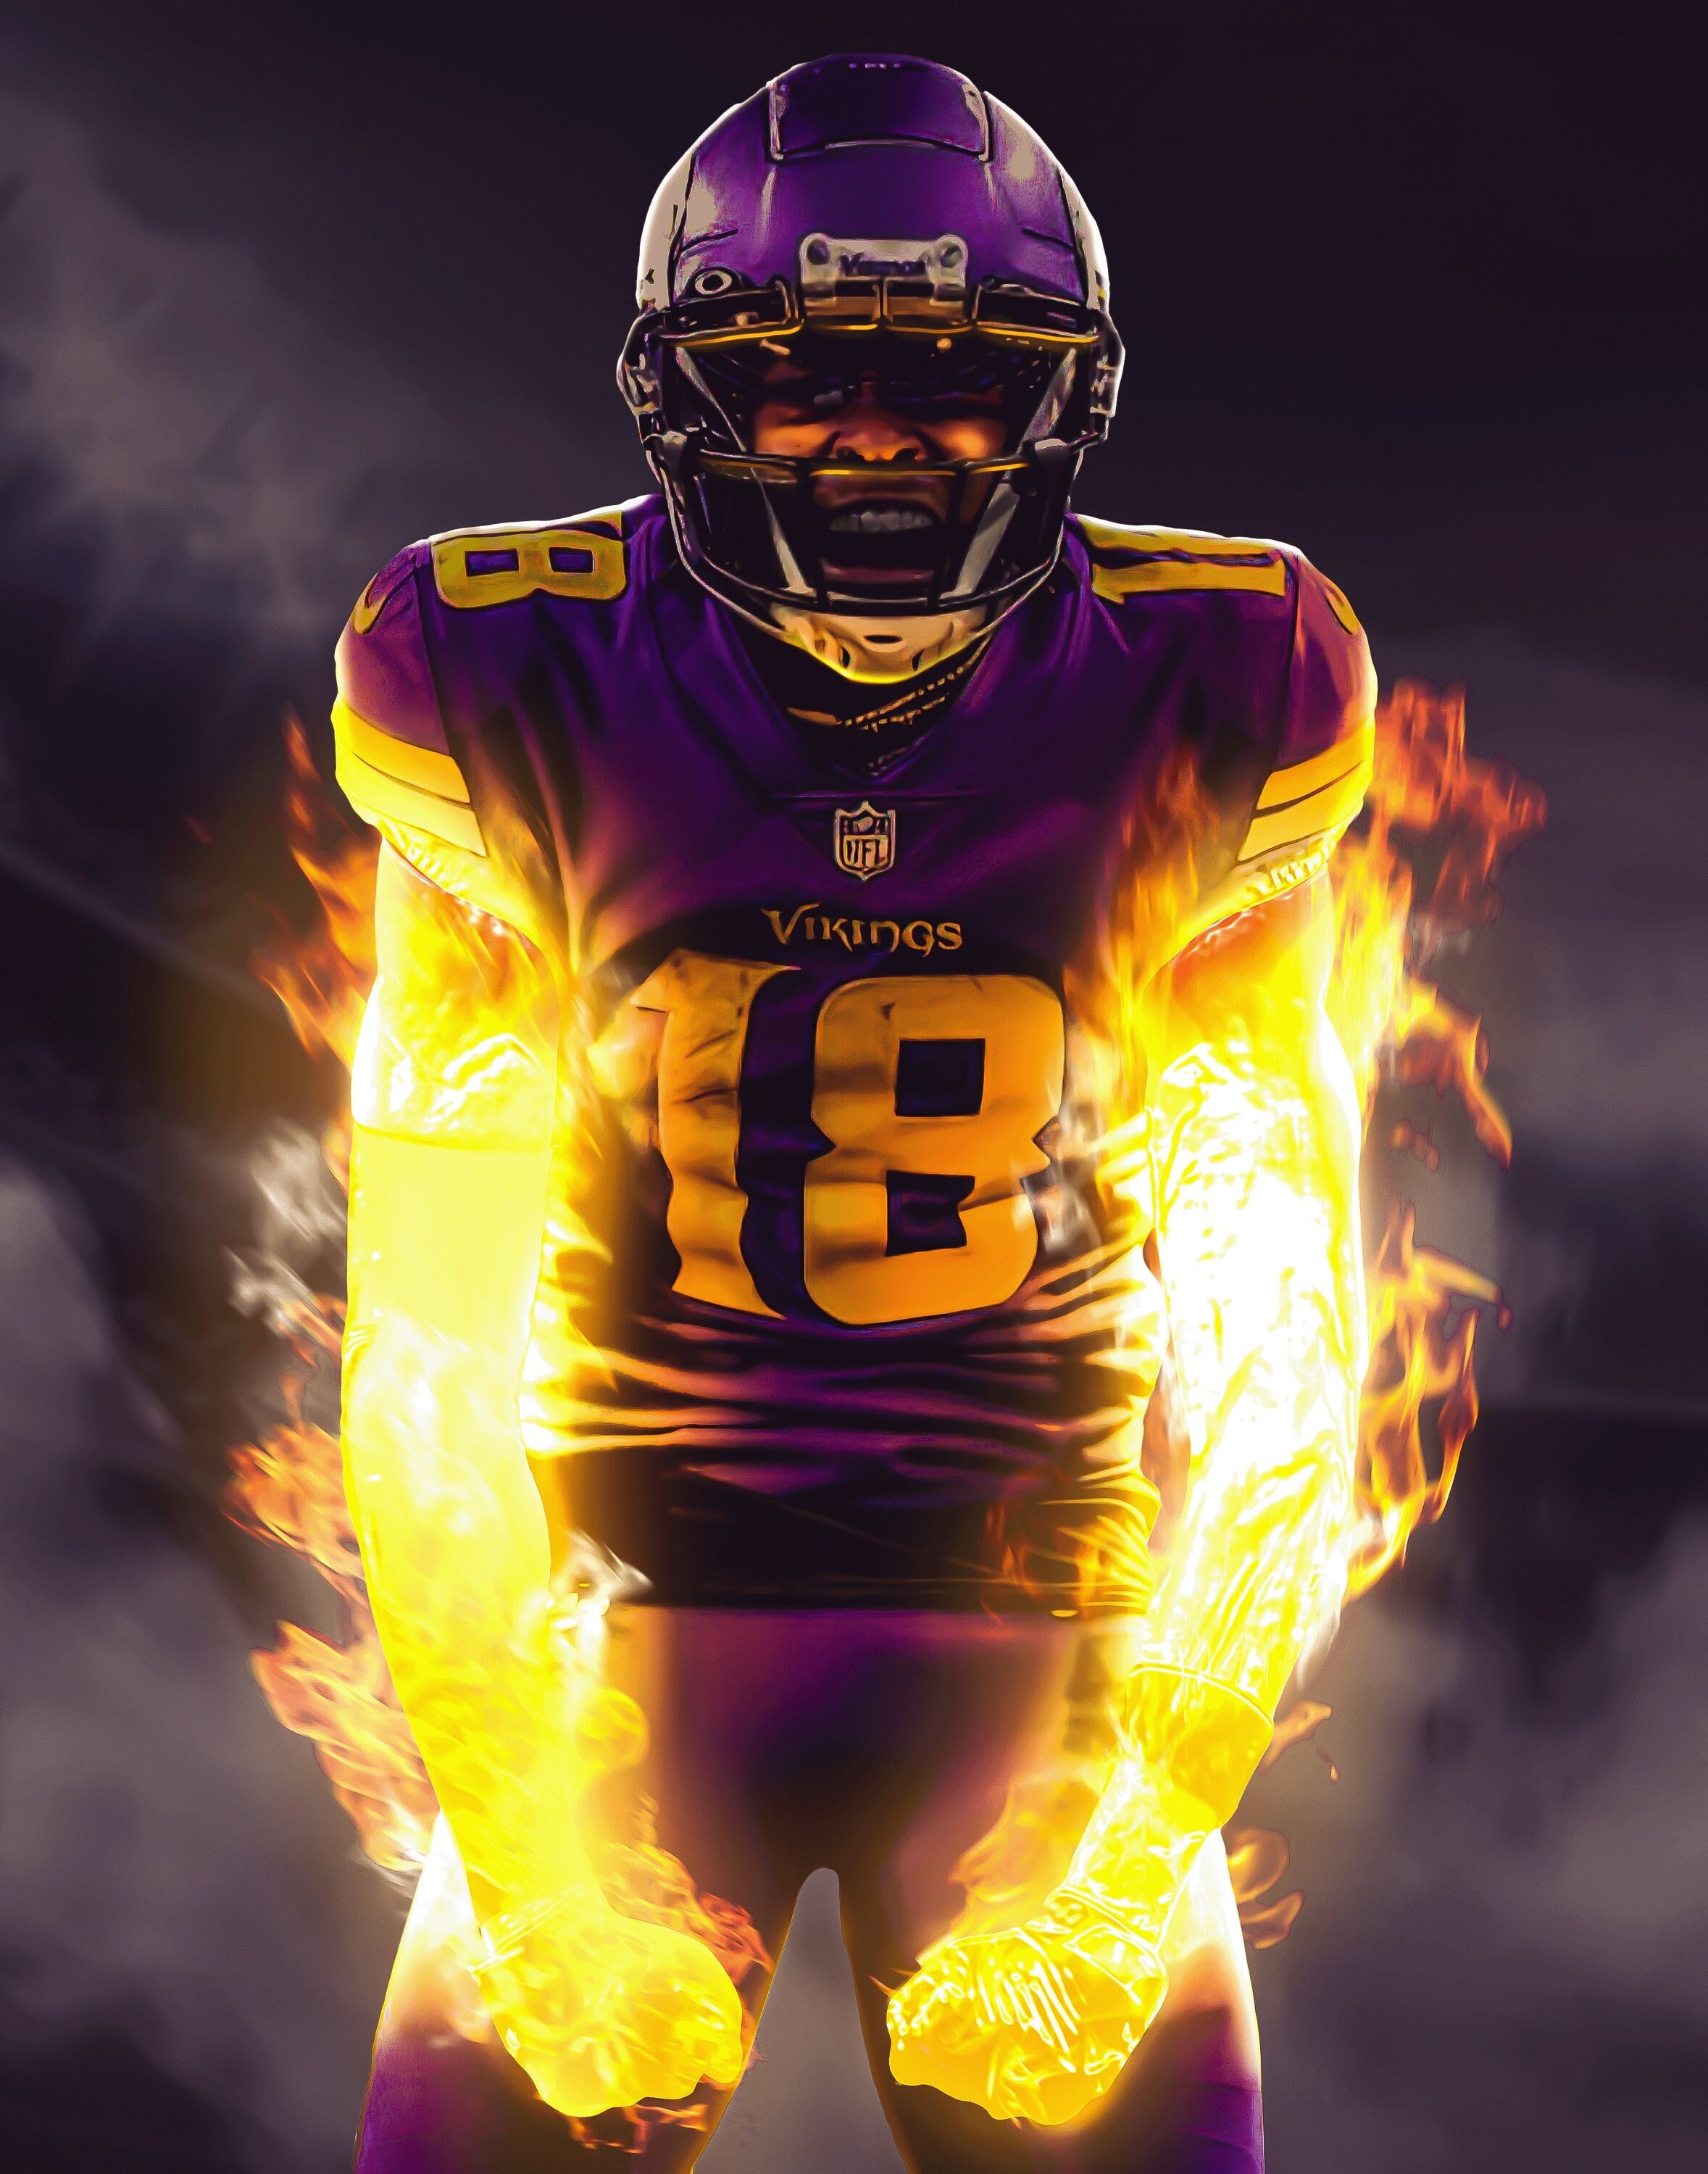 Justin jefferson flaming poster minnesota vikings offensive player of the year nfl poster man cave kids room